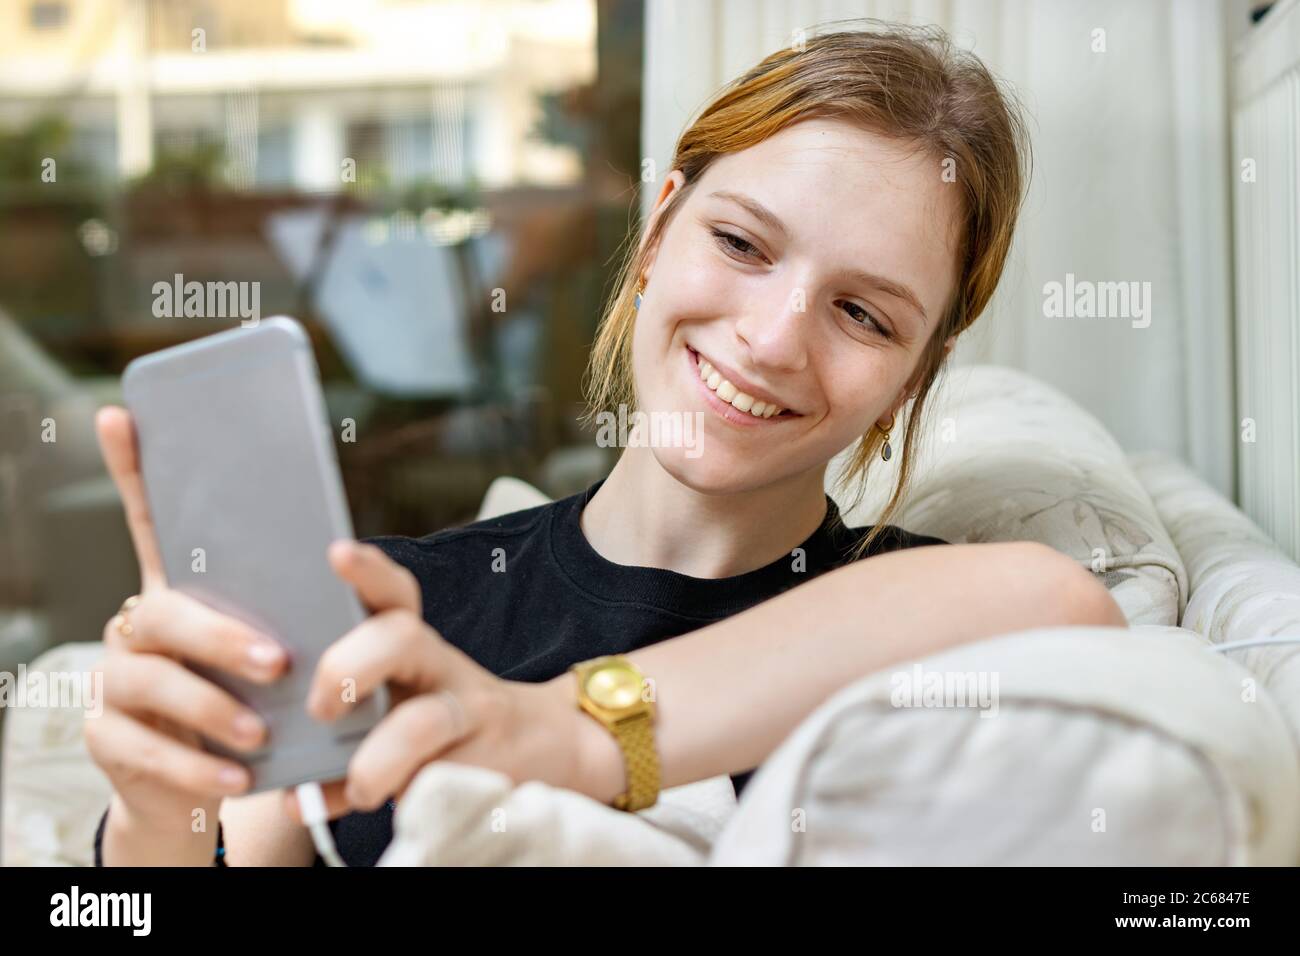 Teenage girl taking a selfie with a smart phone smiling sitting at home Stock Photo